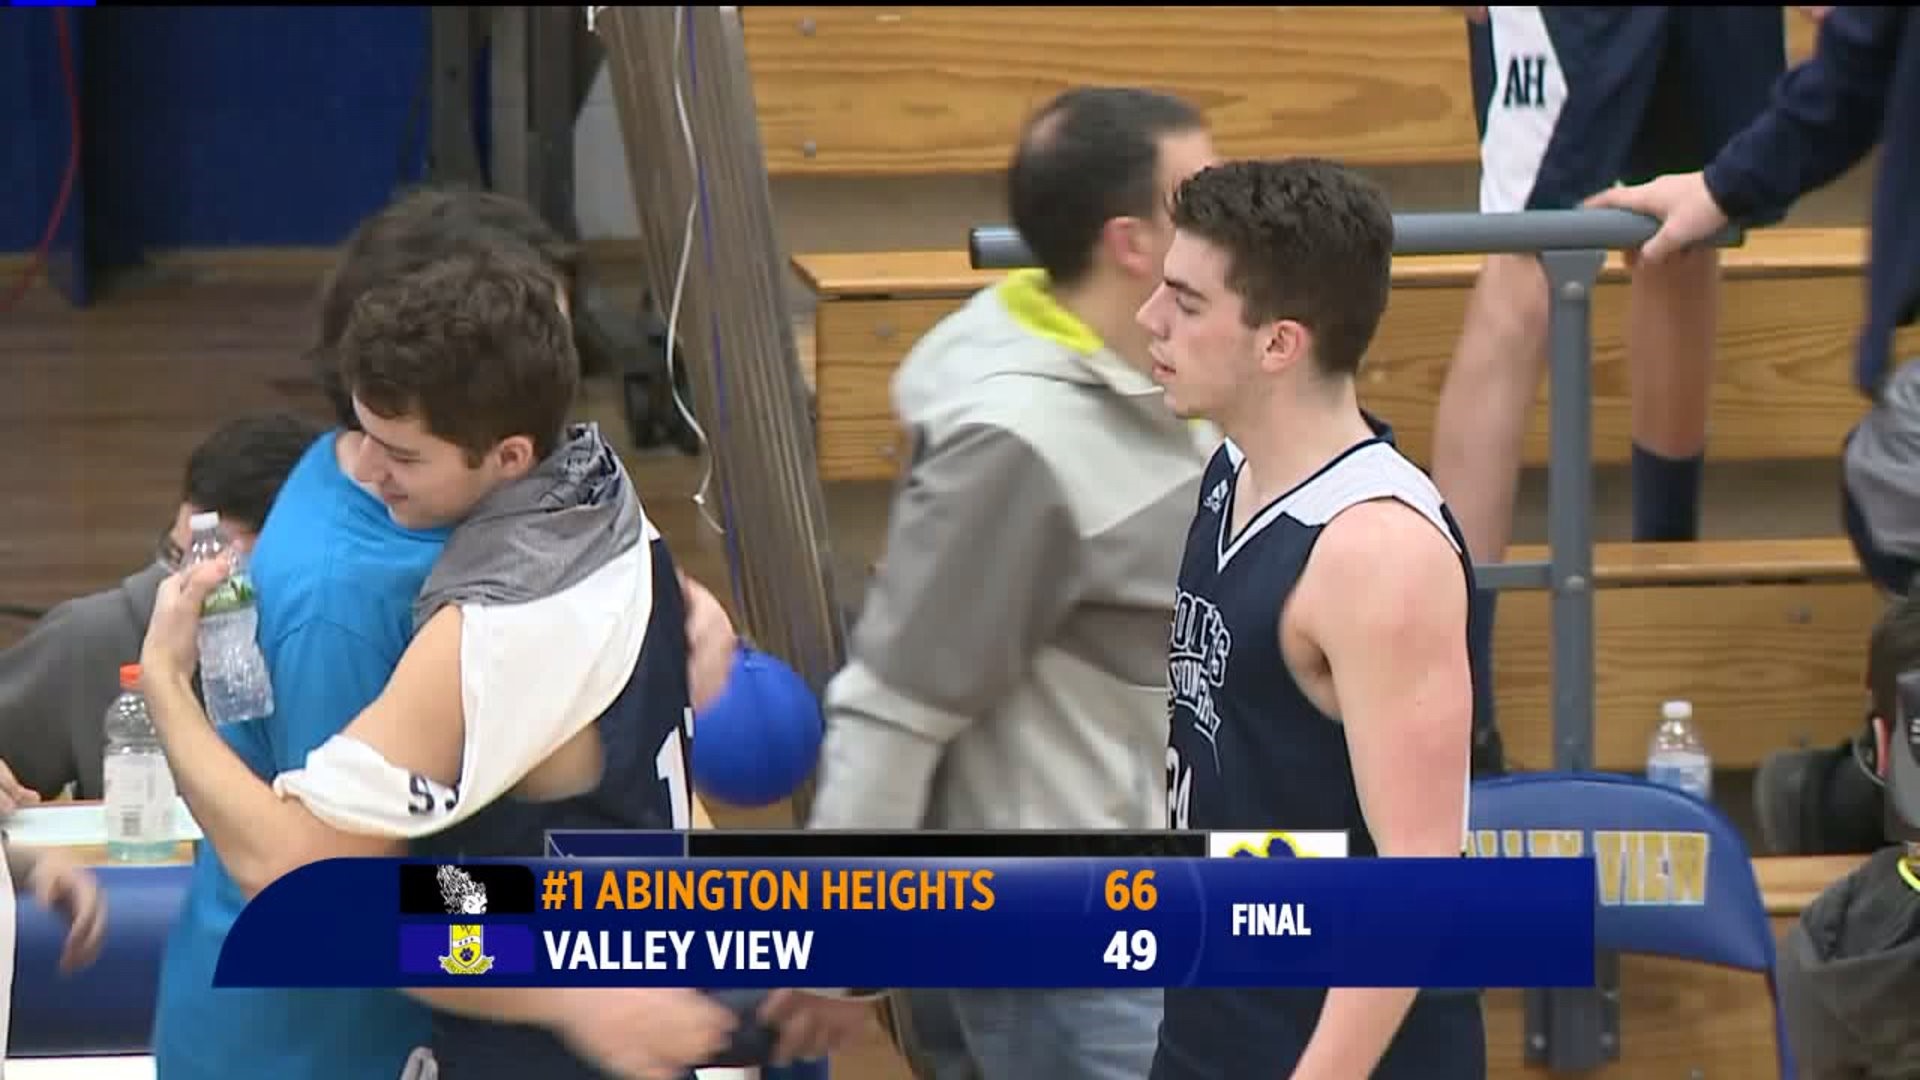 Abington Heights Wins At Valley View, 66-49